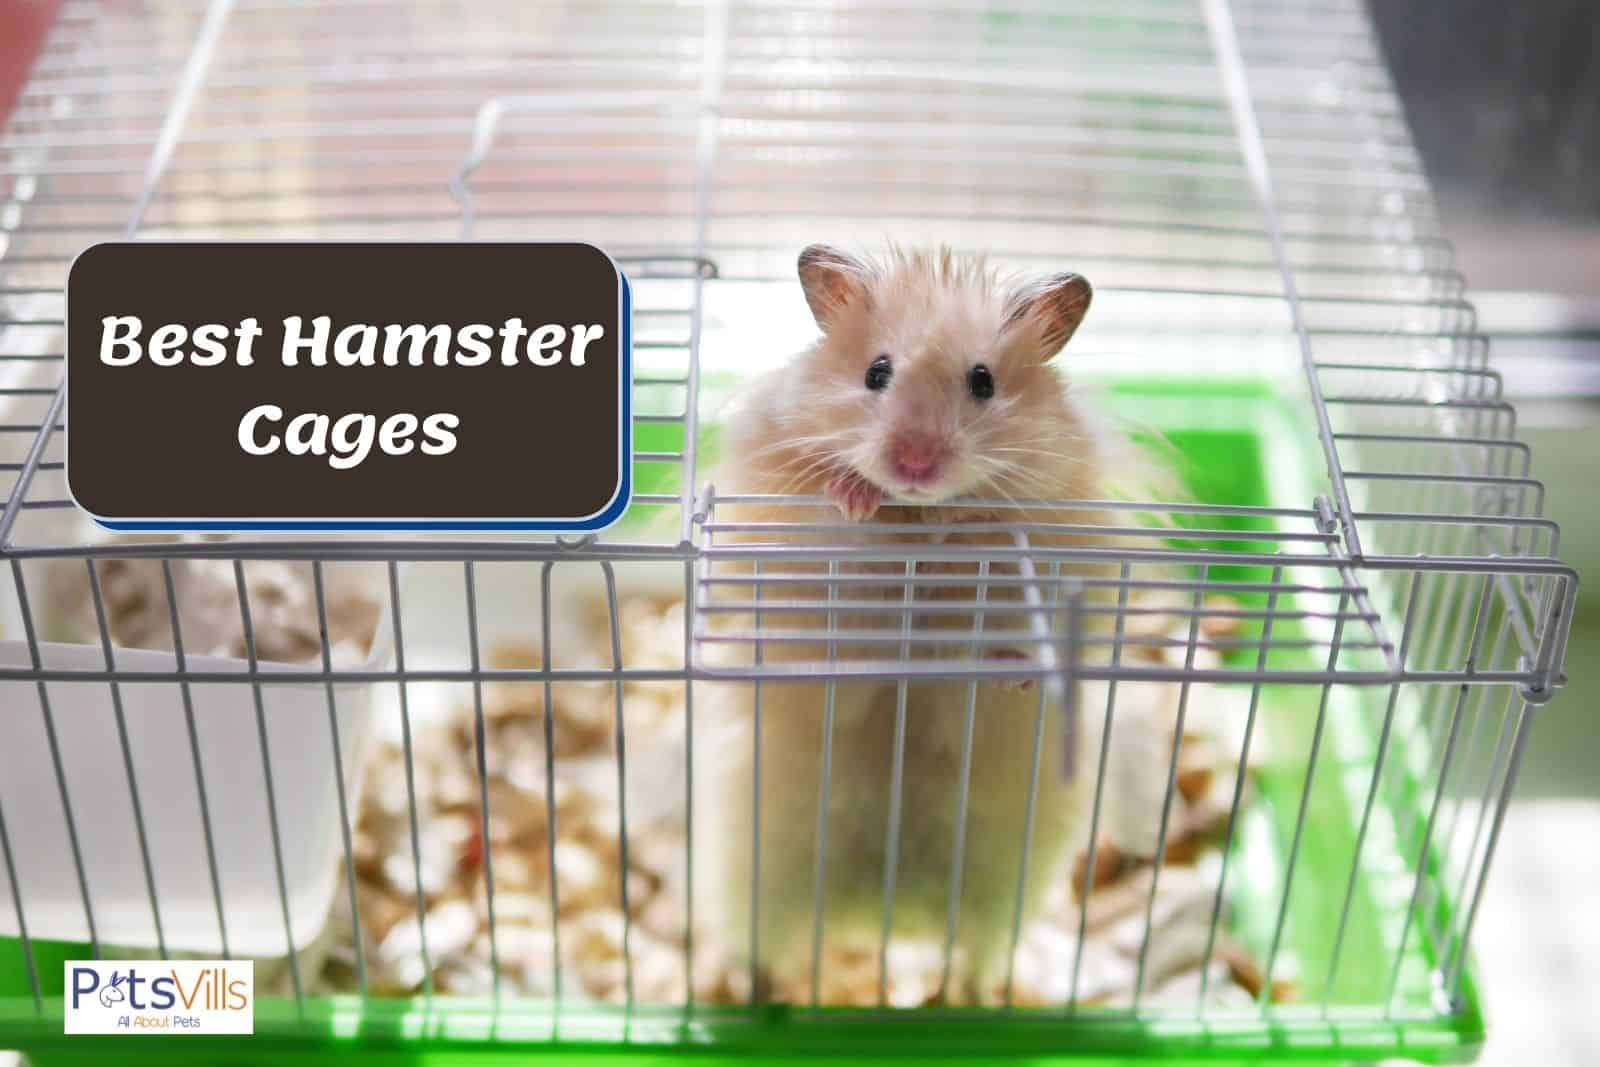 a hamster stand at one of the best hamster cages